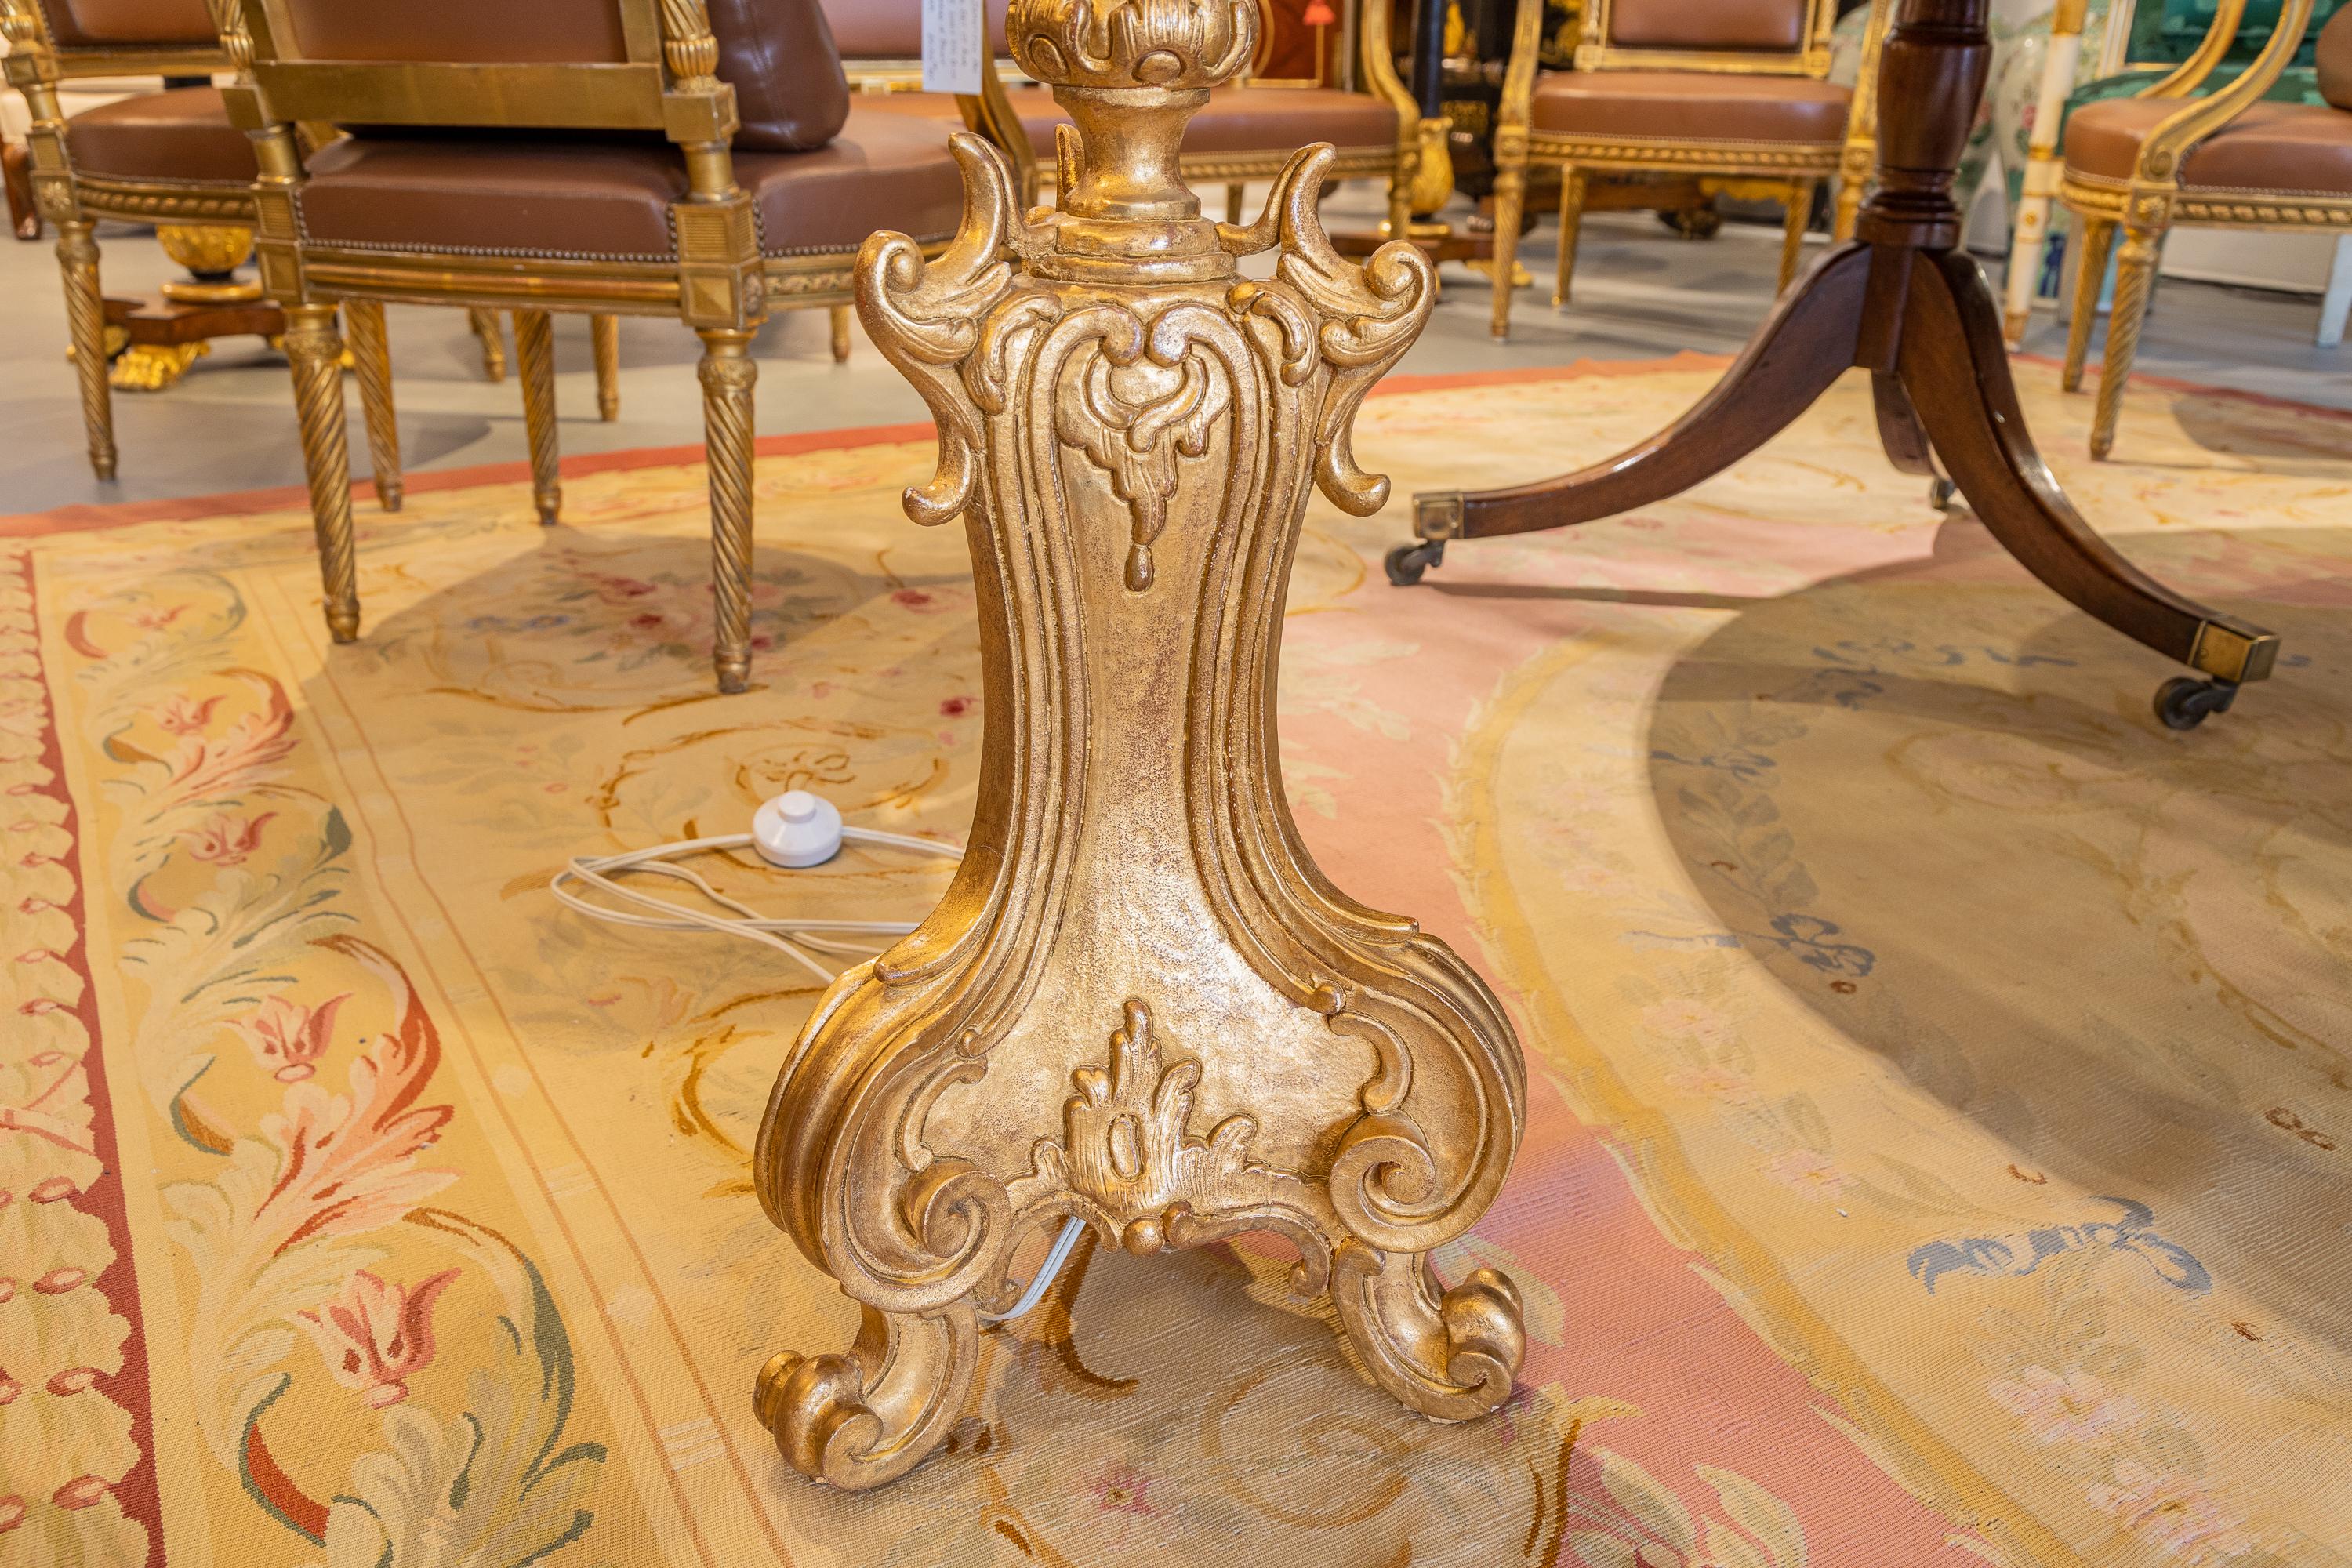 Fine Pair of Gilt Carved French Early 20th C Candelabra Floor Lamps 10 Lights In Good Condition For Sale In Dallas, TX